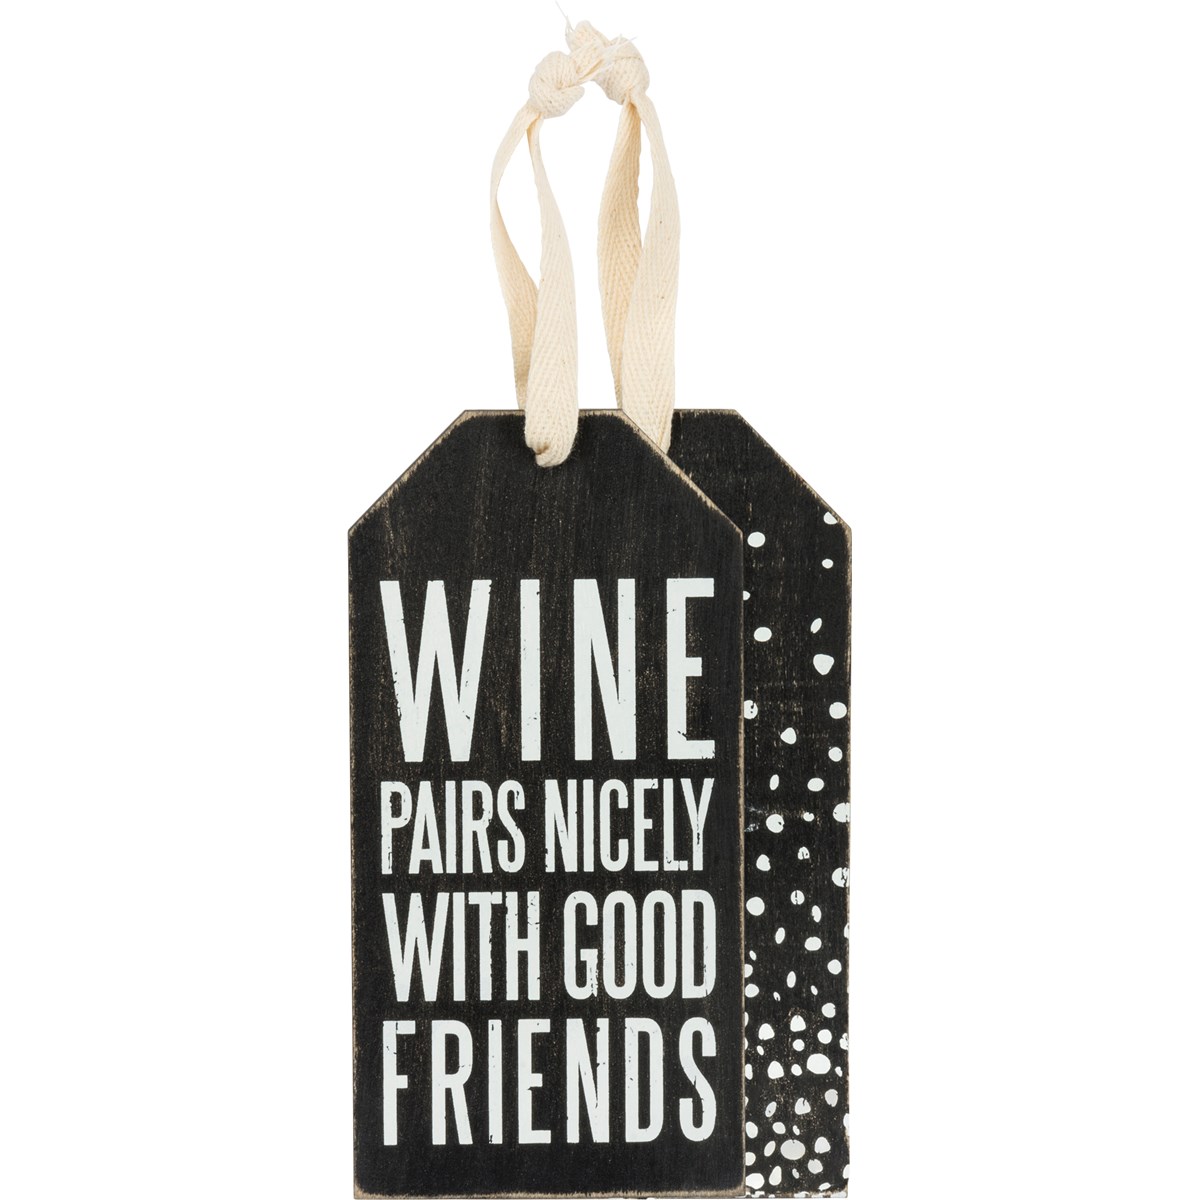 Pairs Nicely Bottle Tag - Wood, Cotton